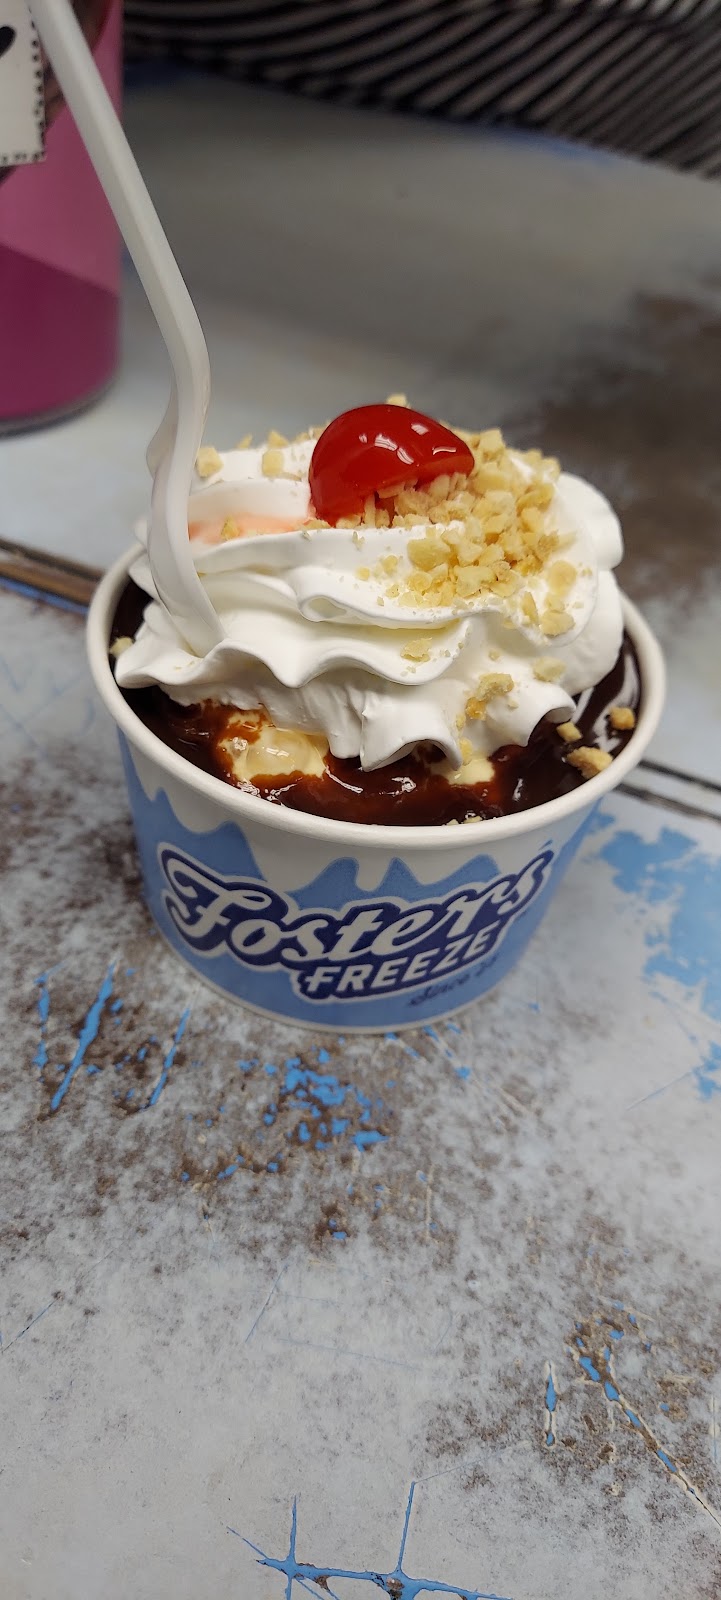 Fosters Freeze | 2704 Whittier Blvd, Los Angeles, CA 90023, USA | Phone: (323) 262-8046